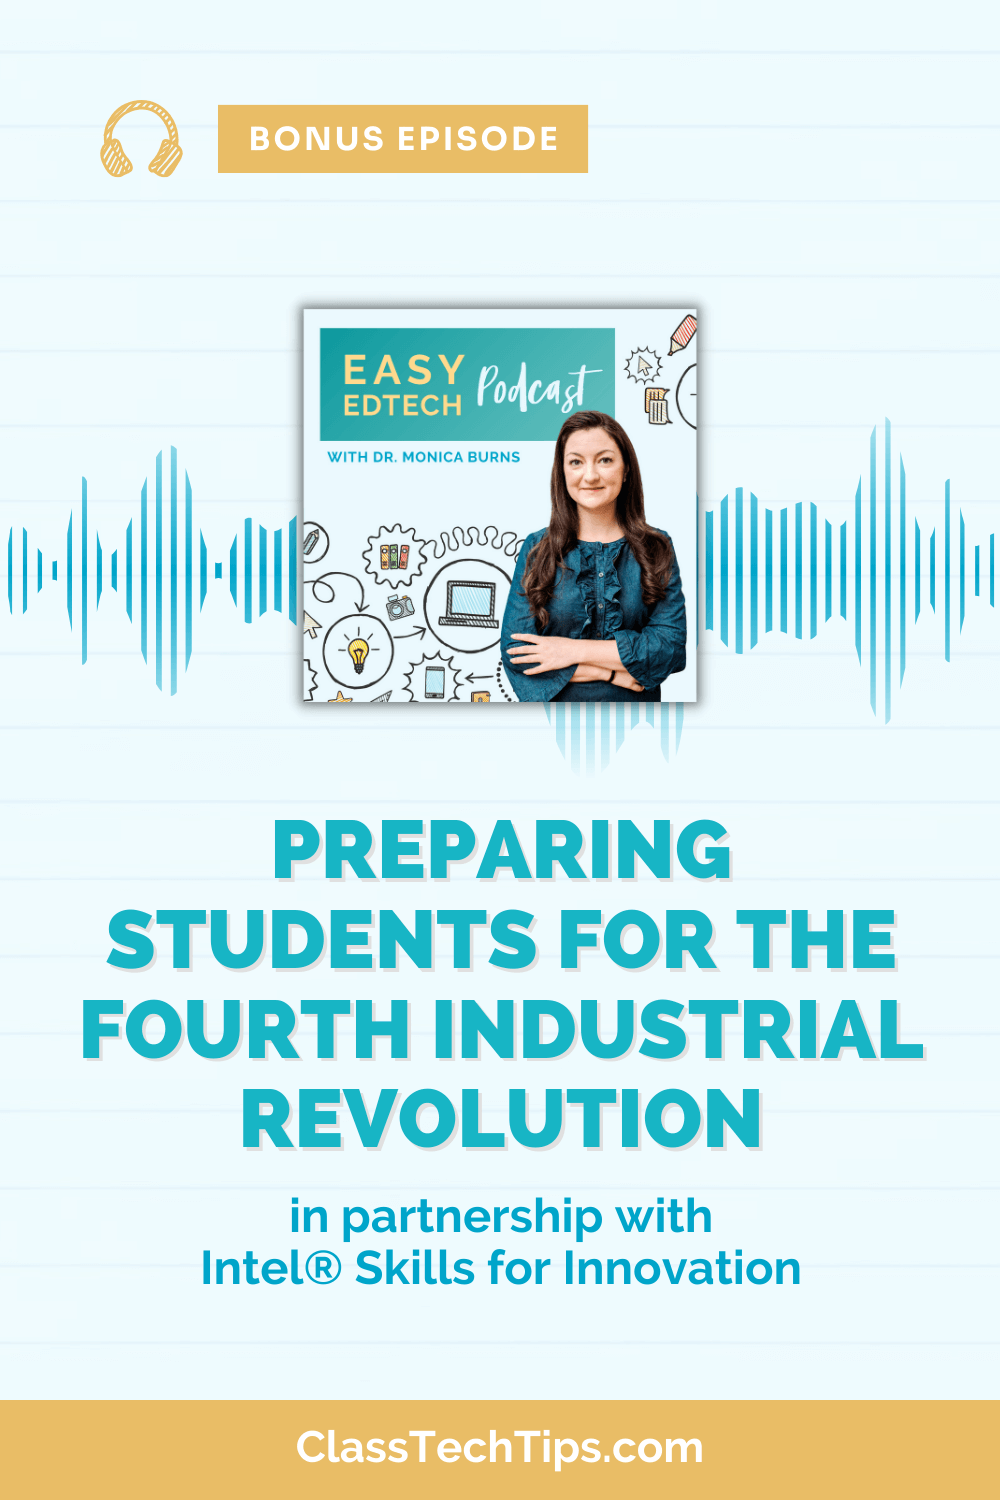 The graphic includes a photo of Dr. Burns to the left with a backdrop of doodles symbolizing various educational technologies. Text to the right reads "BONUS EPISODE: PREPARING STUDENTS FOR THE FOURTH INDUSTRIAL REVOLUTION in partnership with Intel® Skills for Innovation."